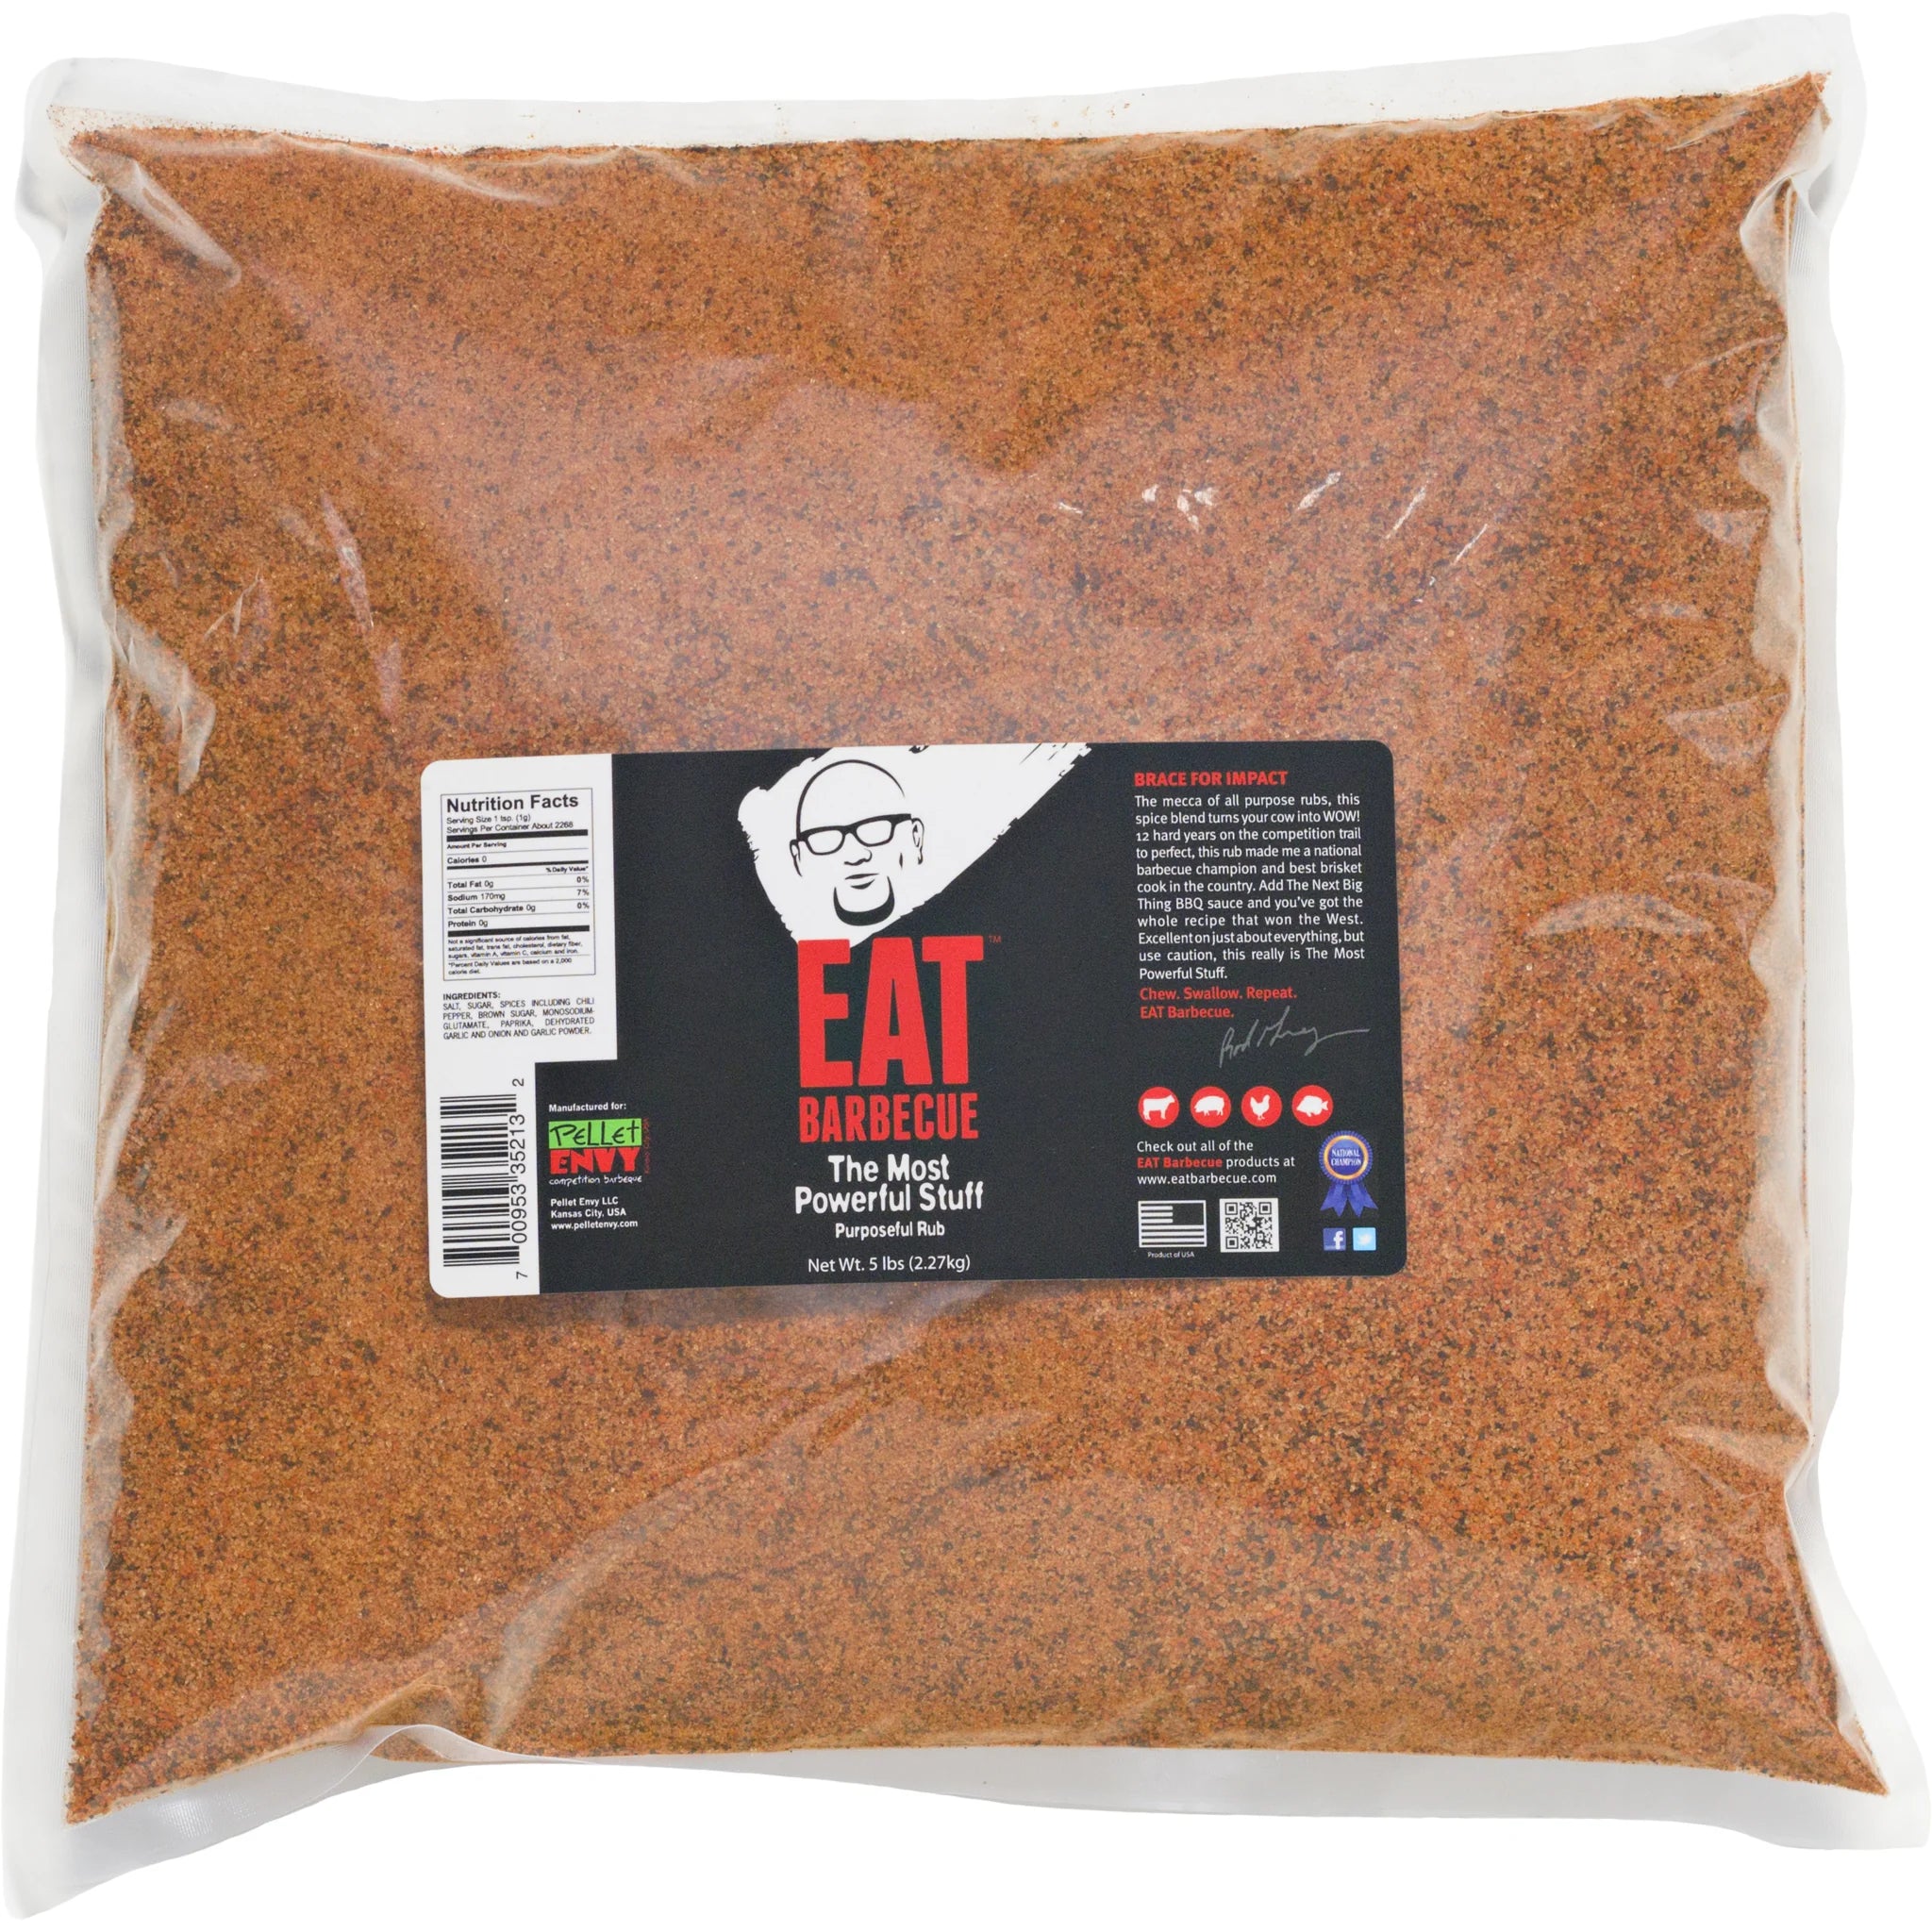 A large vacuum-sealed bag of EAT Barbecue "The Most Powerful Stuff" BBQ rub weighing 5 lbs (2.27kg). The label features the same cartoon image of a bald man wearing glasses with the text "EAT Barbecue" in red. The bag includes a nutrition facts panel and a barcode.